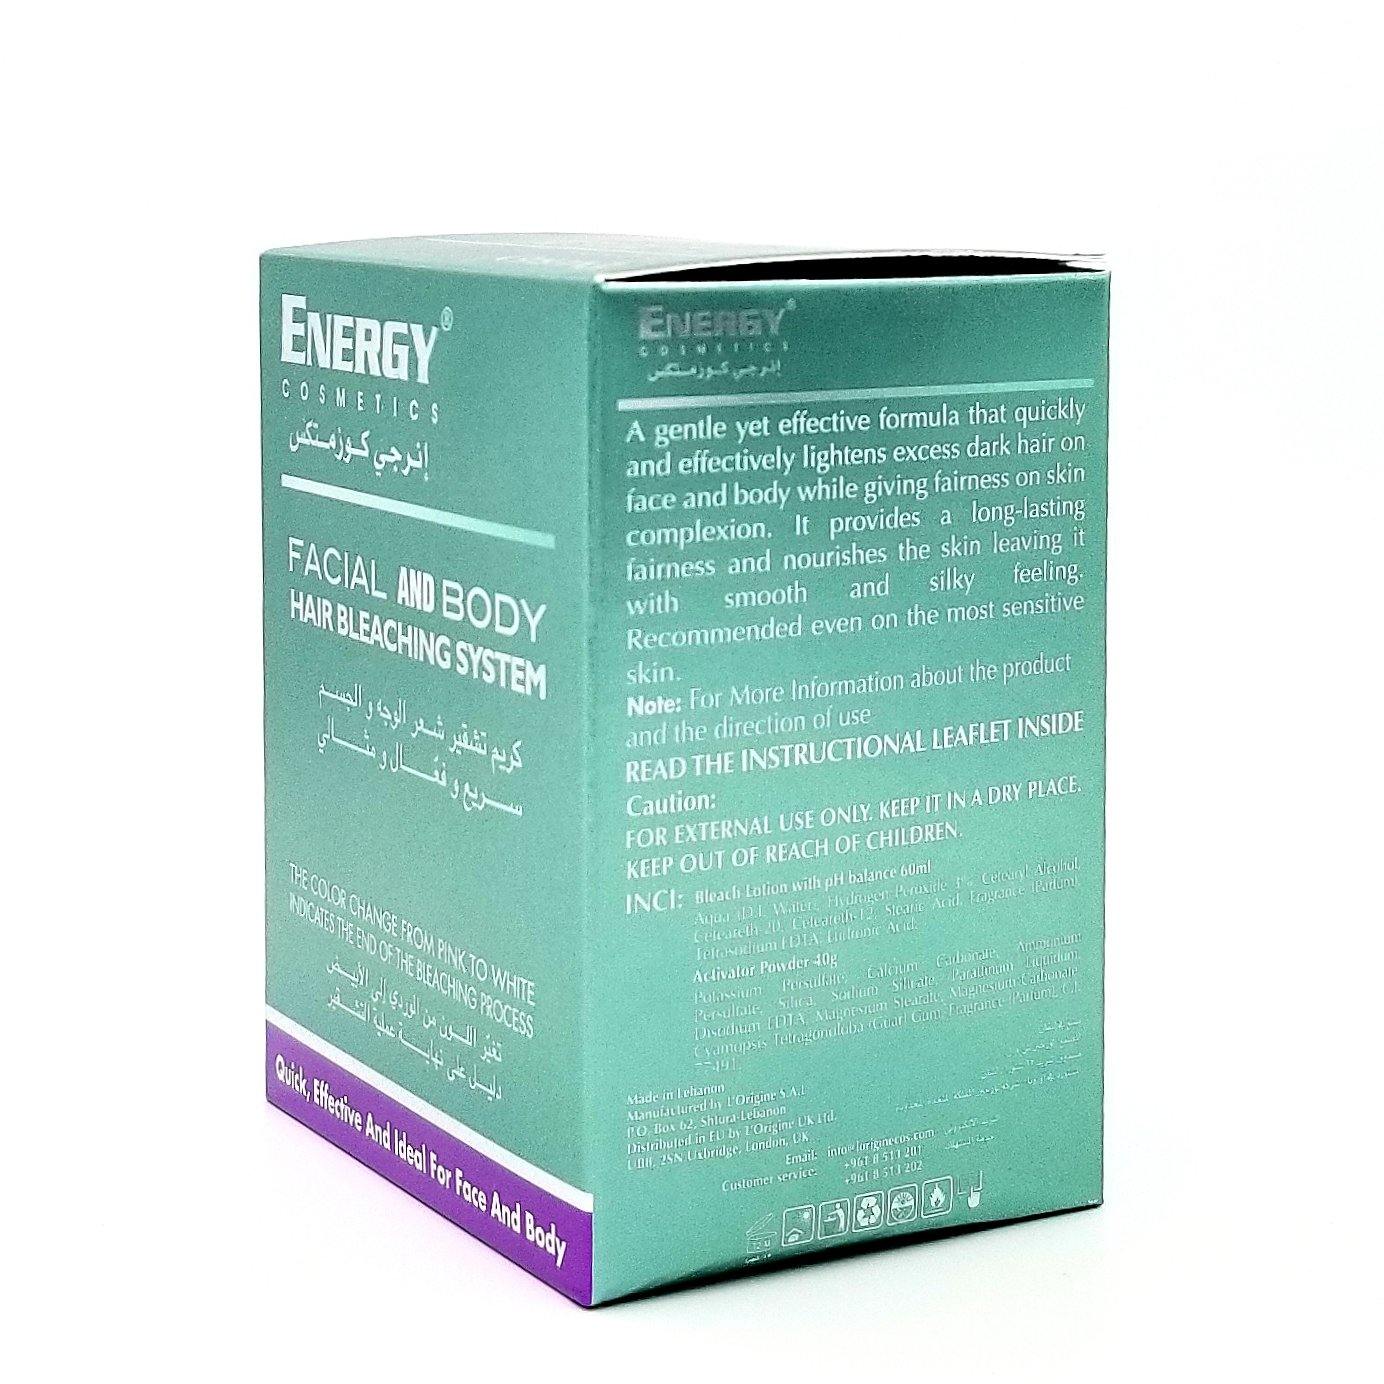 ENERGY Facial And Body Hair Bleaching System